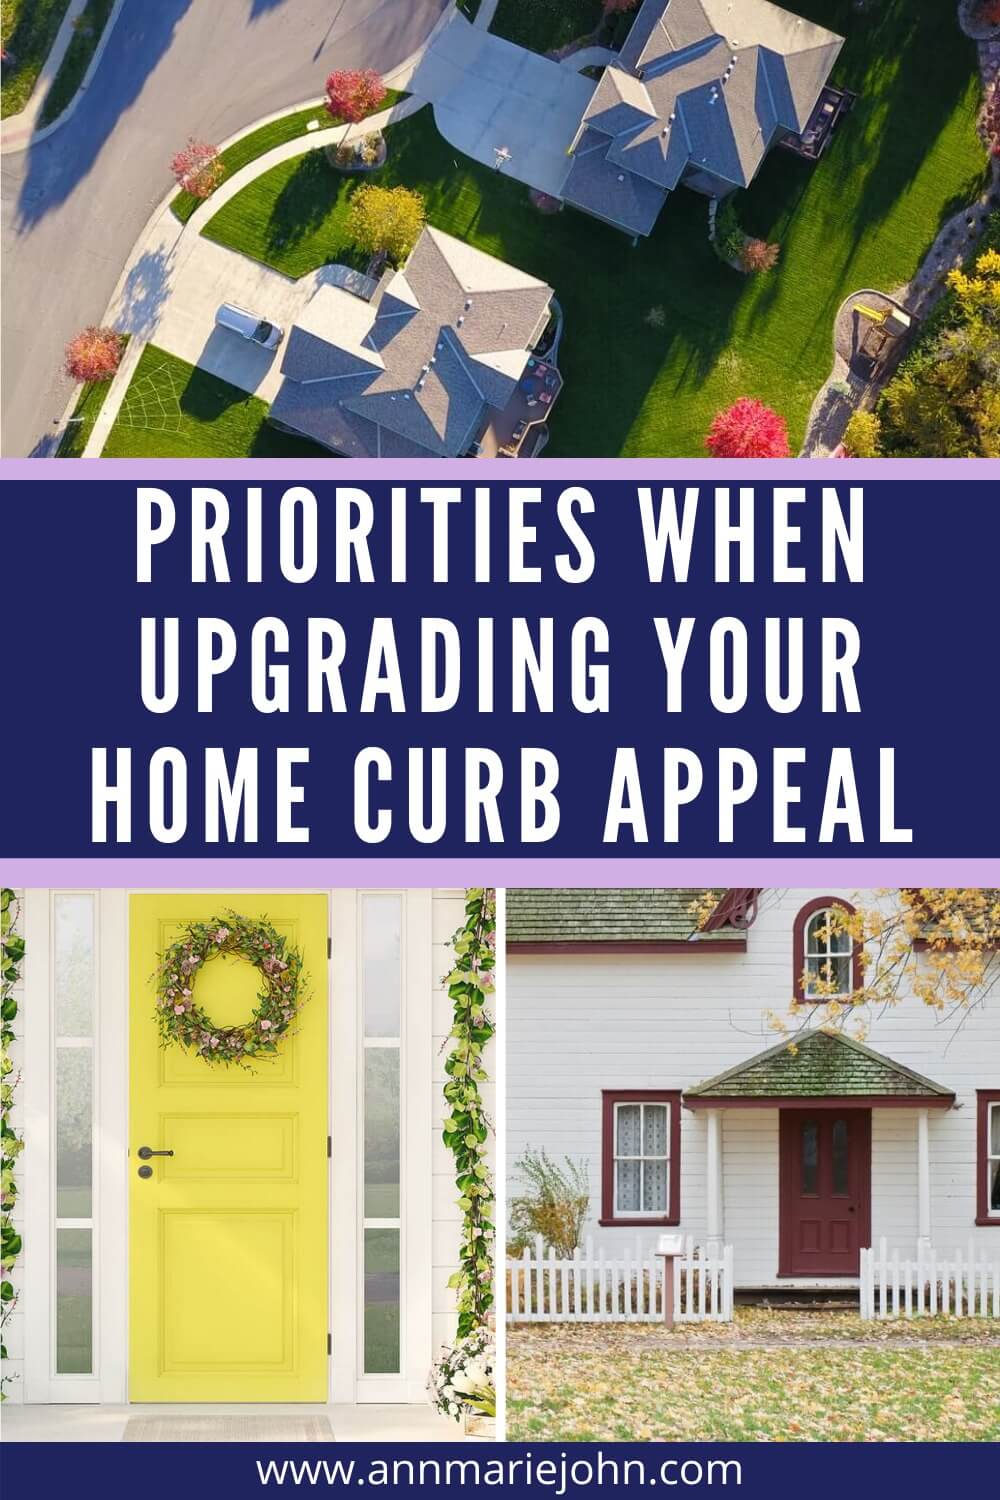 What Are the Priorities When Upgrading Your Home Curb Appeal